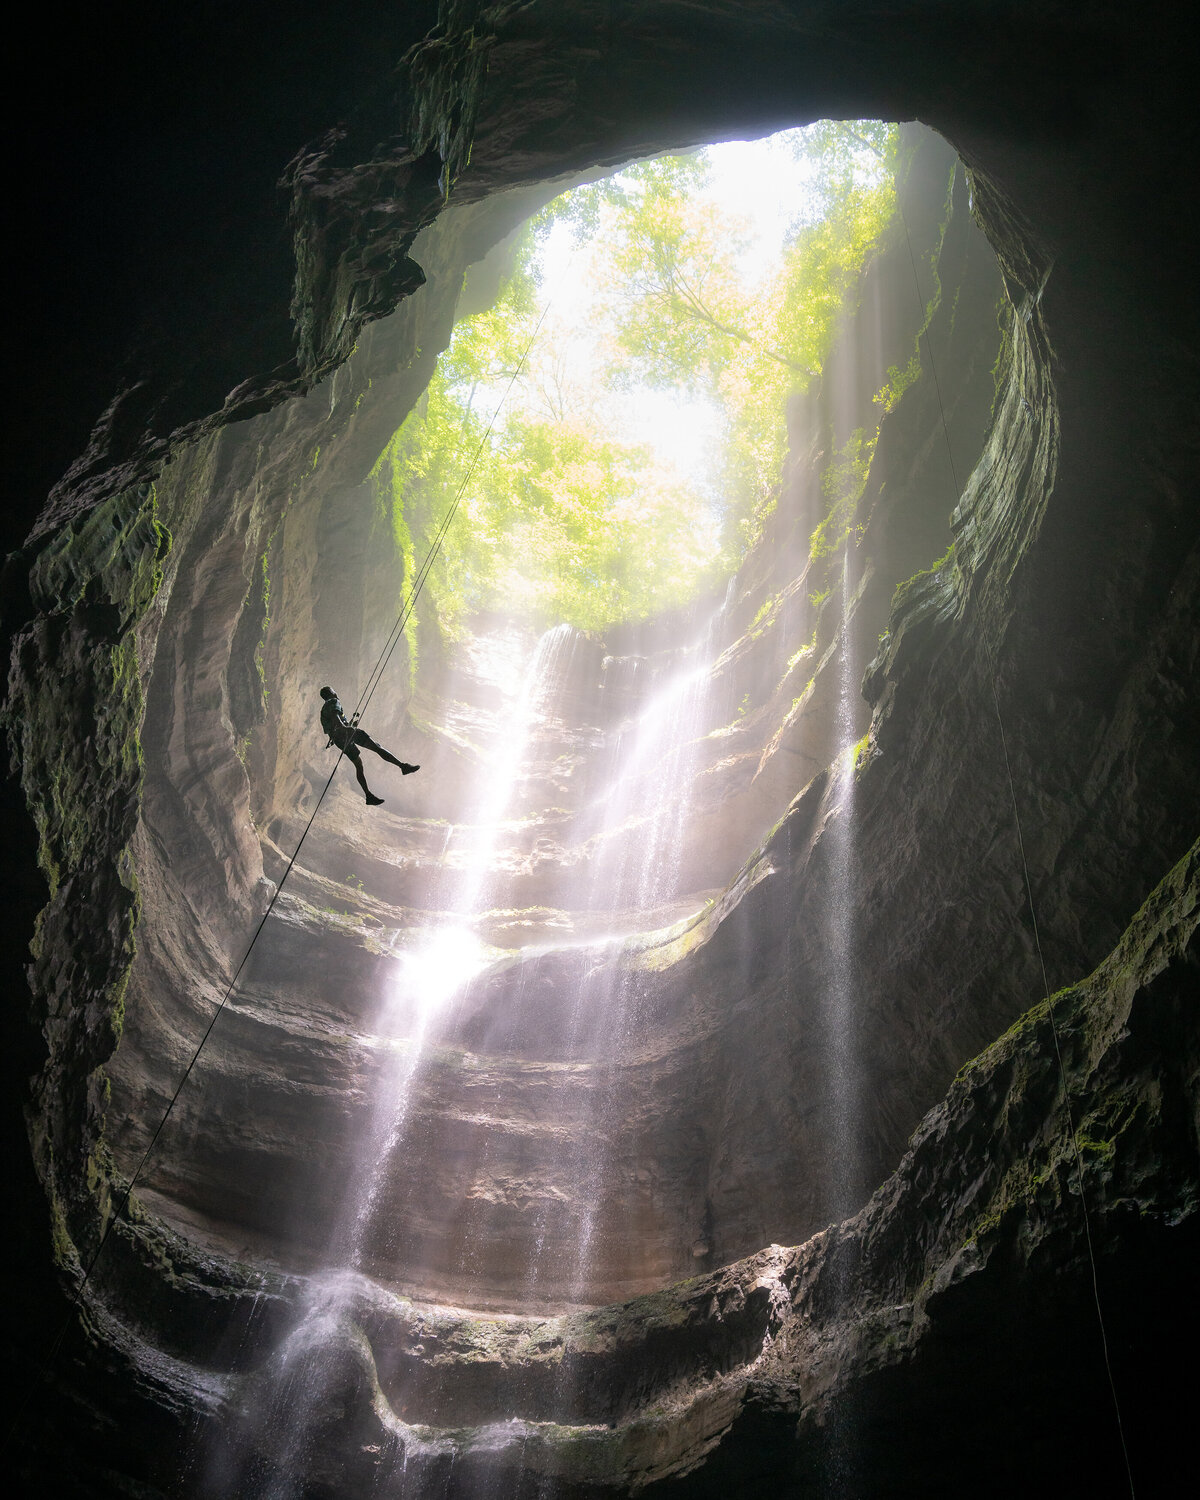 Person hanging in the air on a cable descending into a canyon with trees at the top